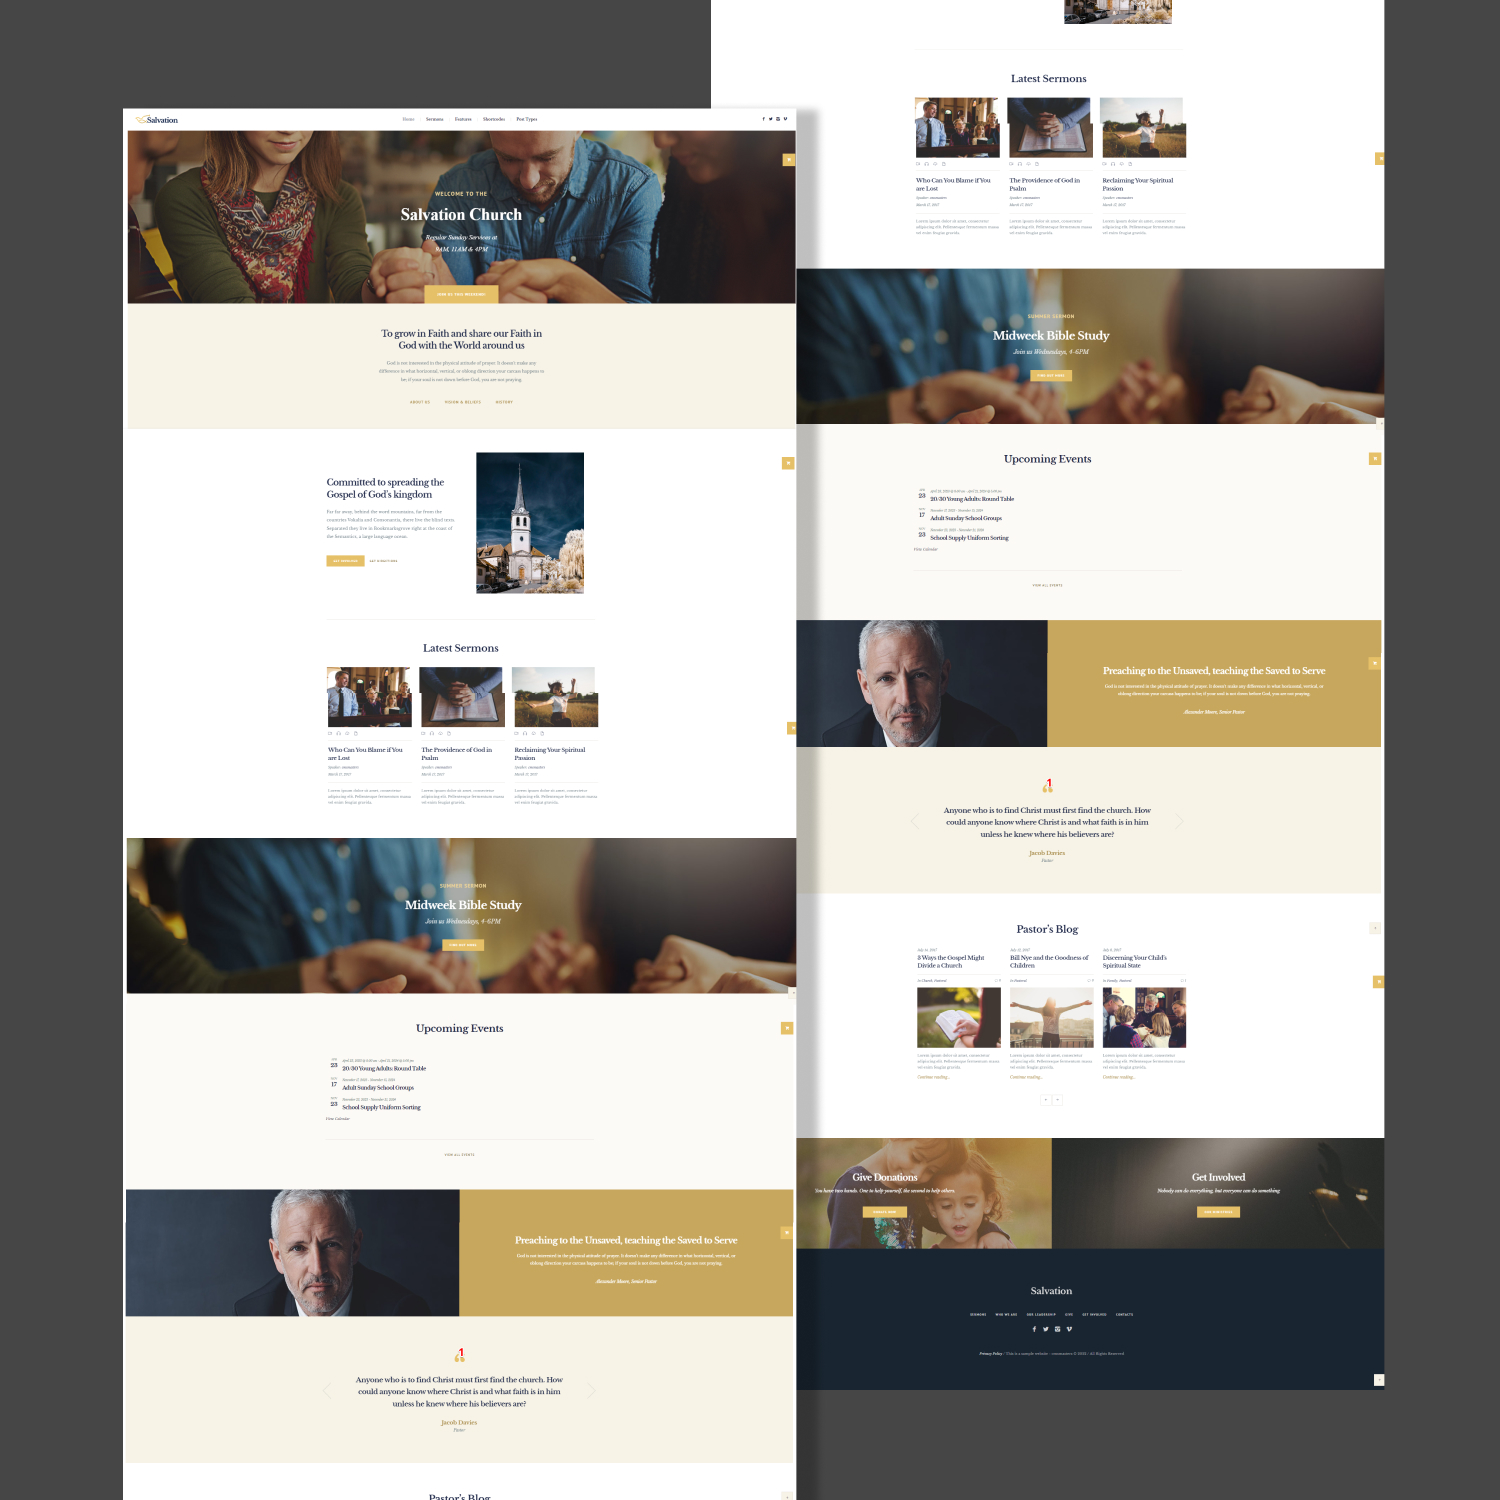 Salvation - Church & Religion WP Theme cover.